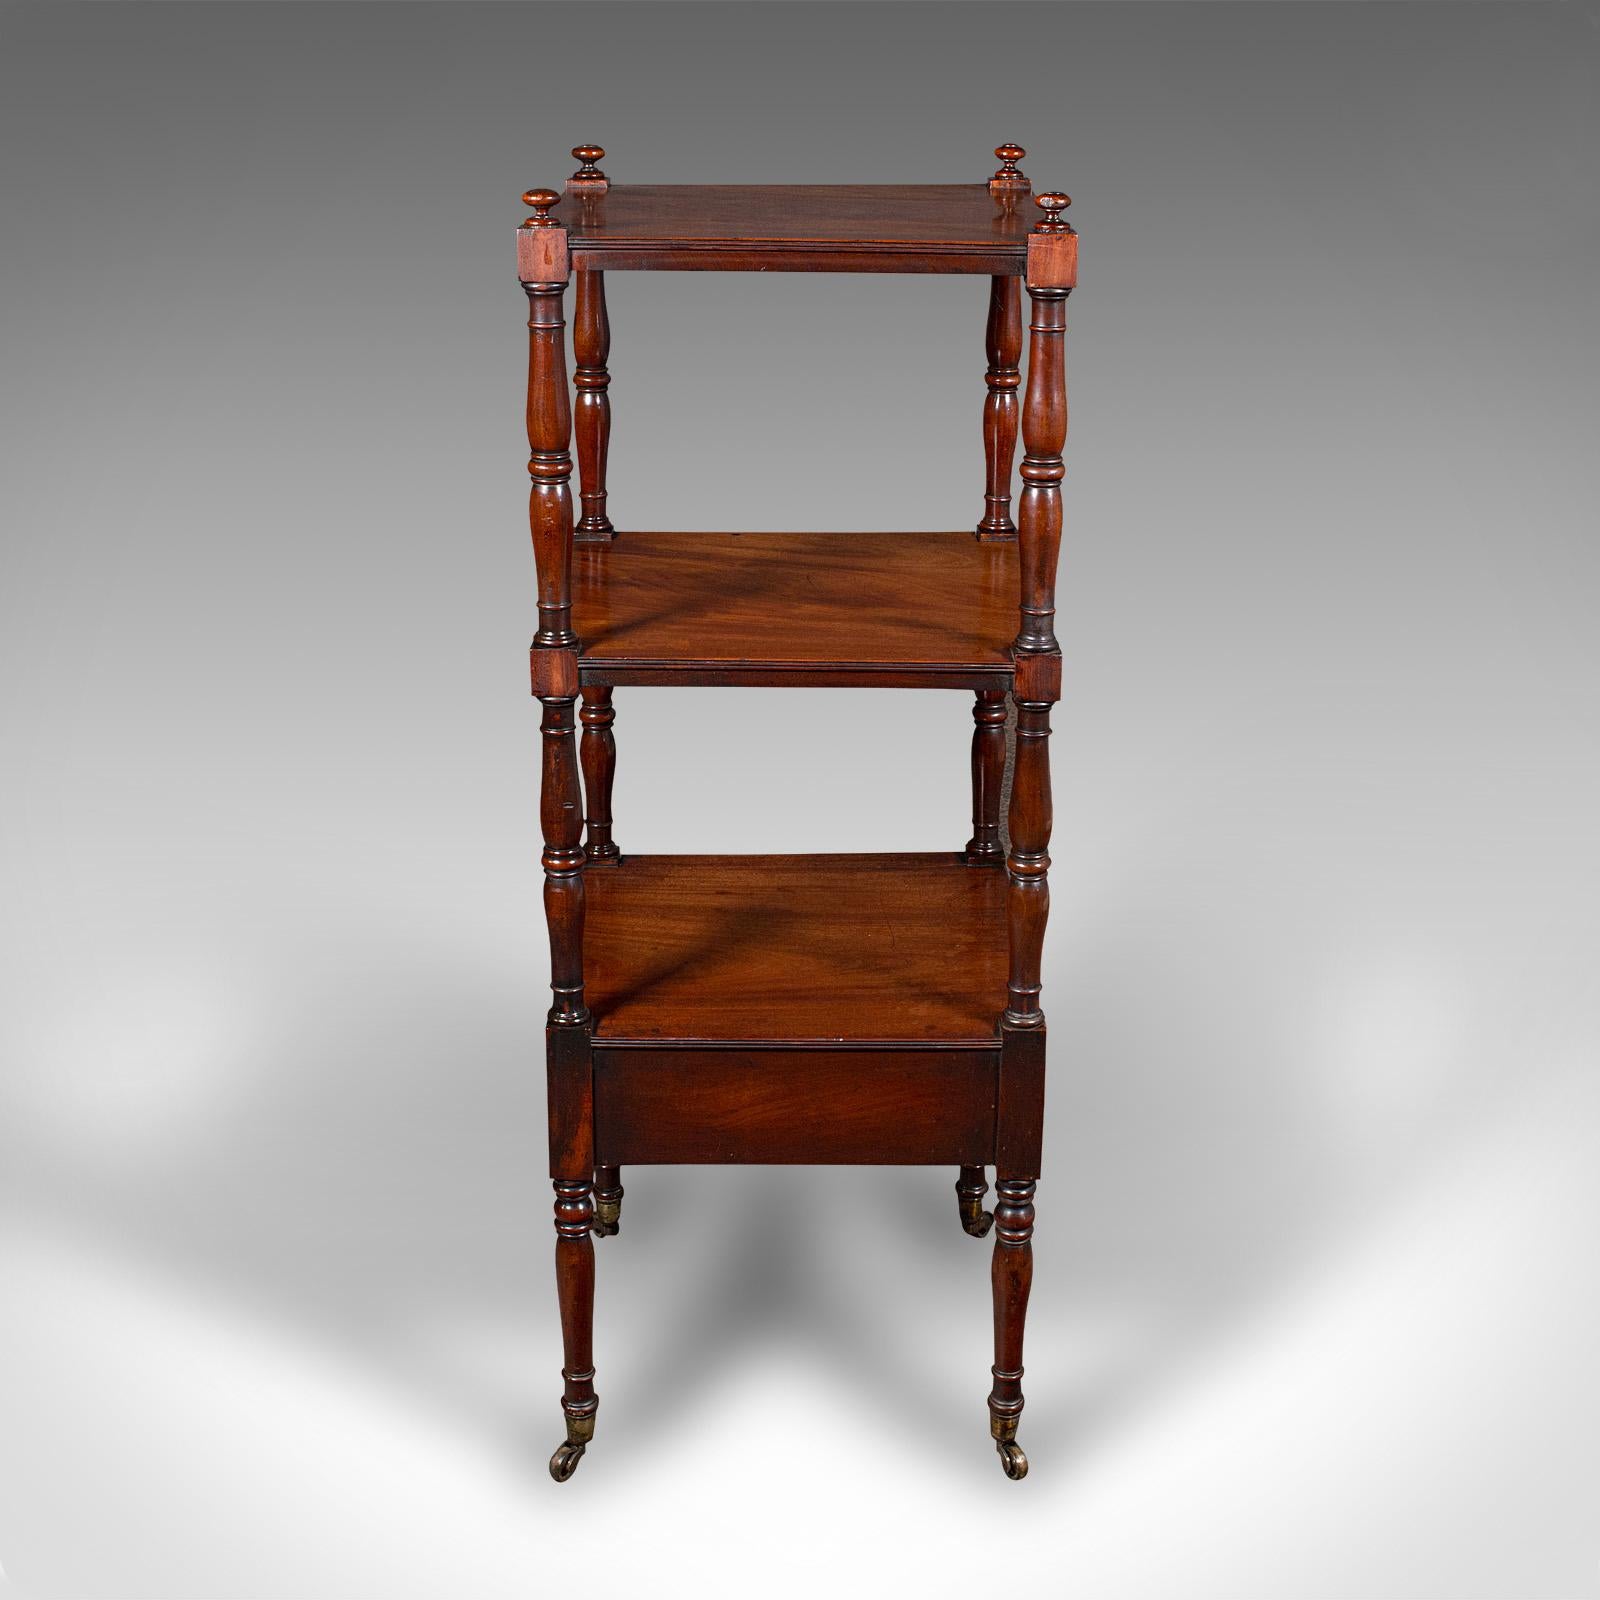 19th Century Antique 3 Tier Whatnot, English, Open Display Stand, Late Georgian, Circa 1800 For Sale